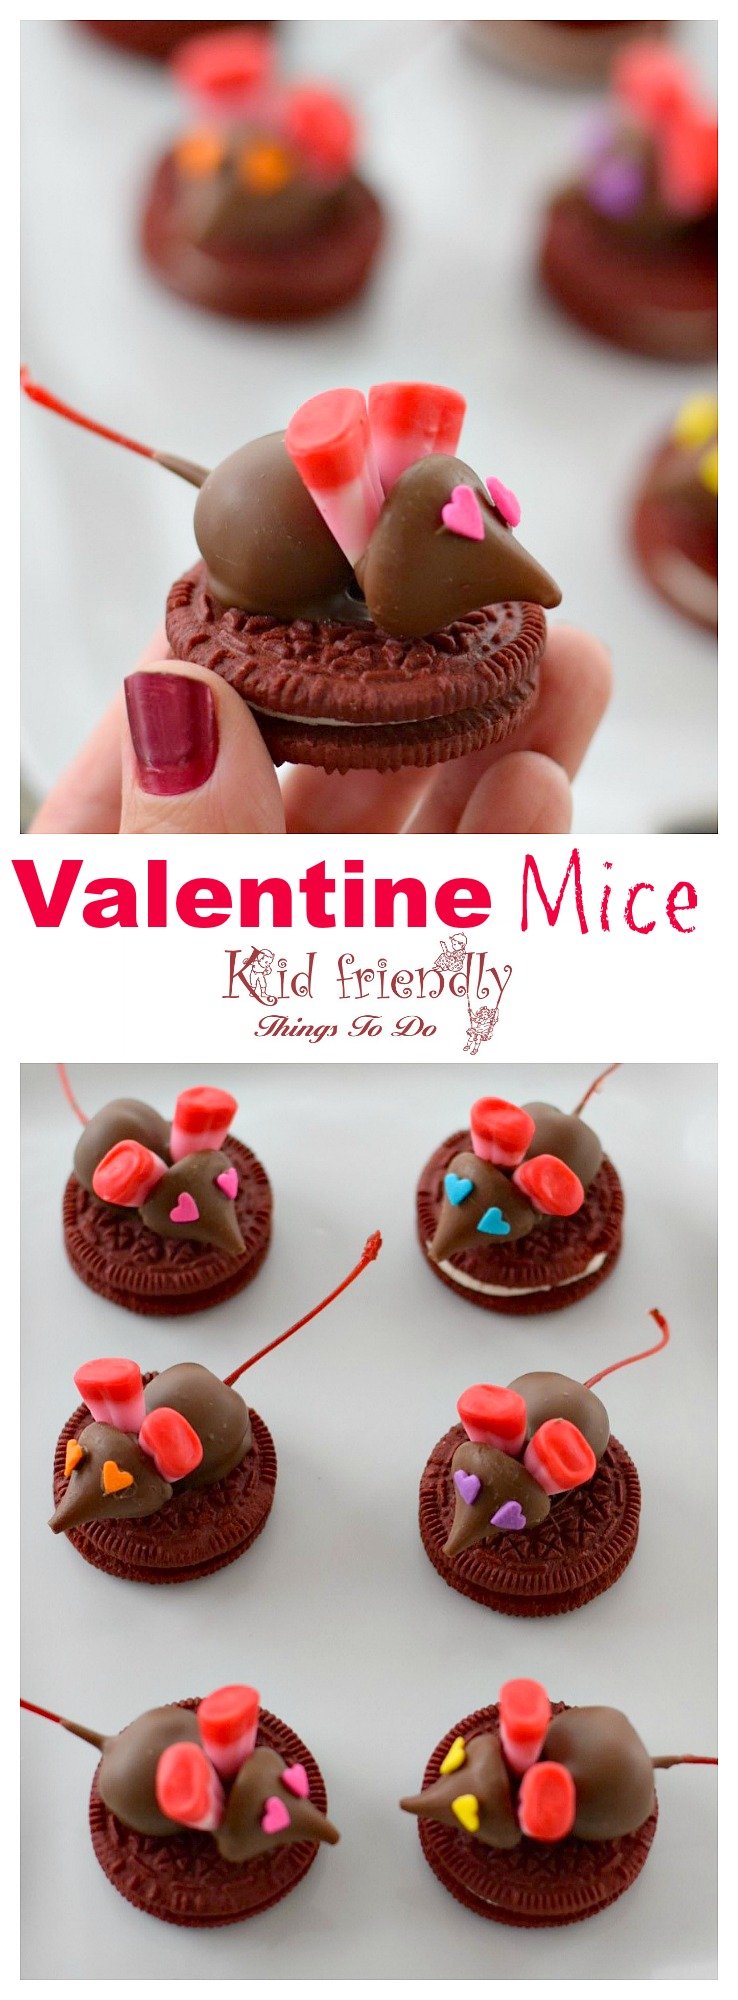 Chocolate Covered Cherry Valentine Mice On A Red Velvet Oreo Cookie for a kids fun food treat - great for parties www.kidfriendlythingstodo.com